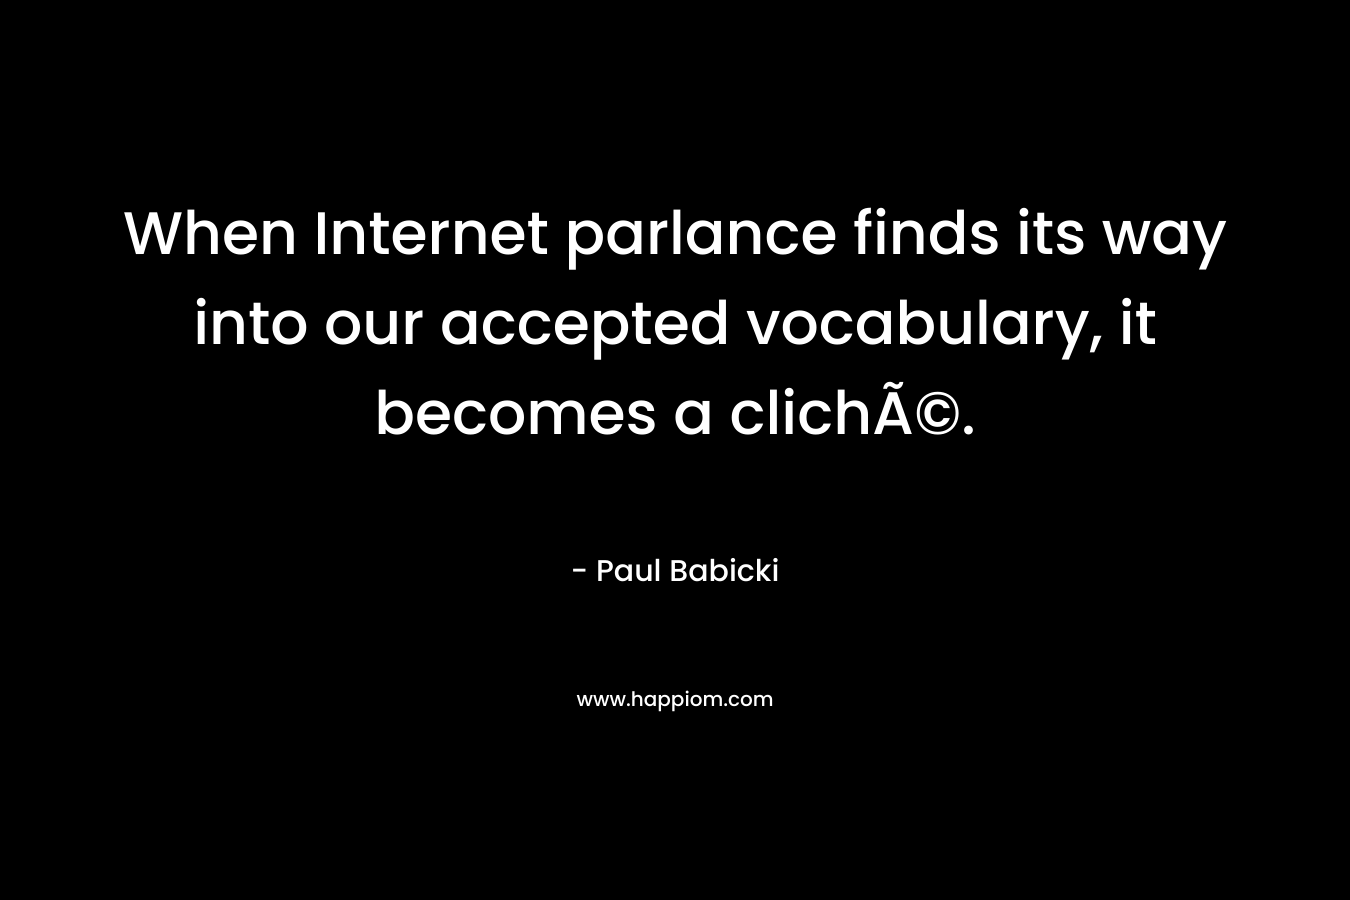 When Internet parlance finds its way into our accepted vocabulary, it becomes a clichÃ©. – Paul Babicki